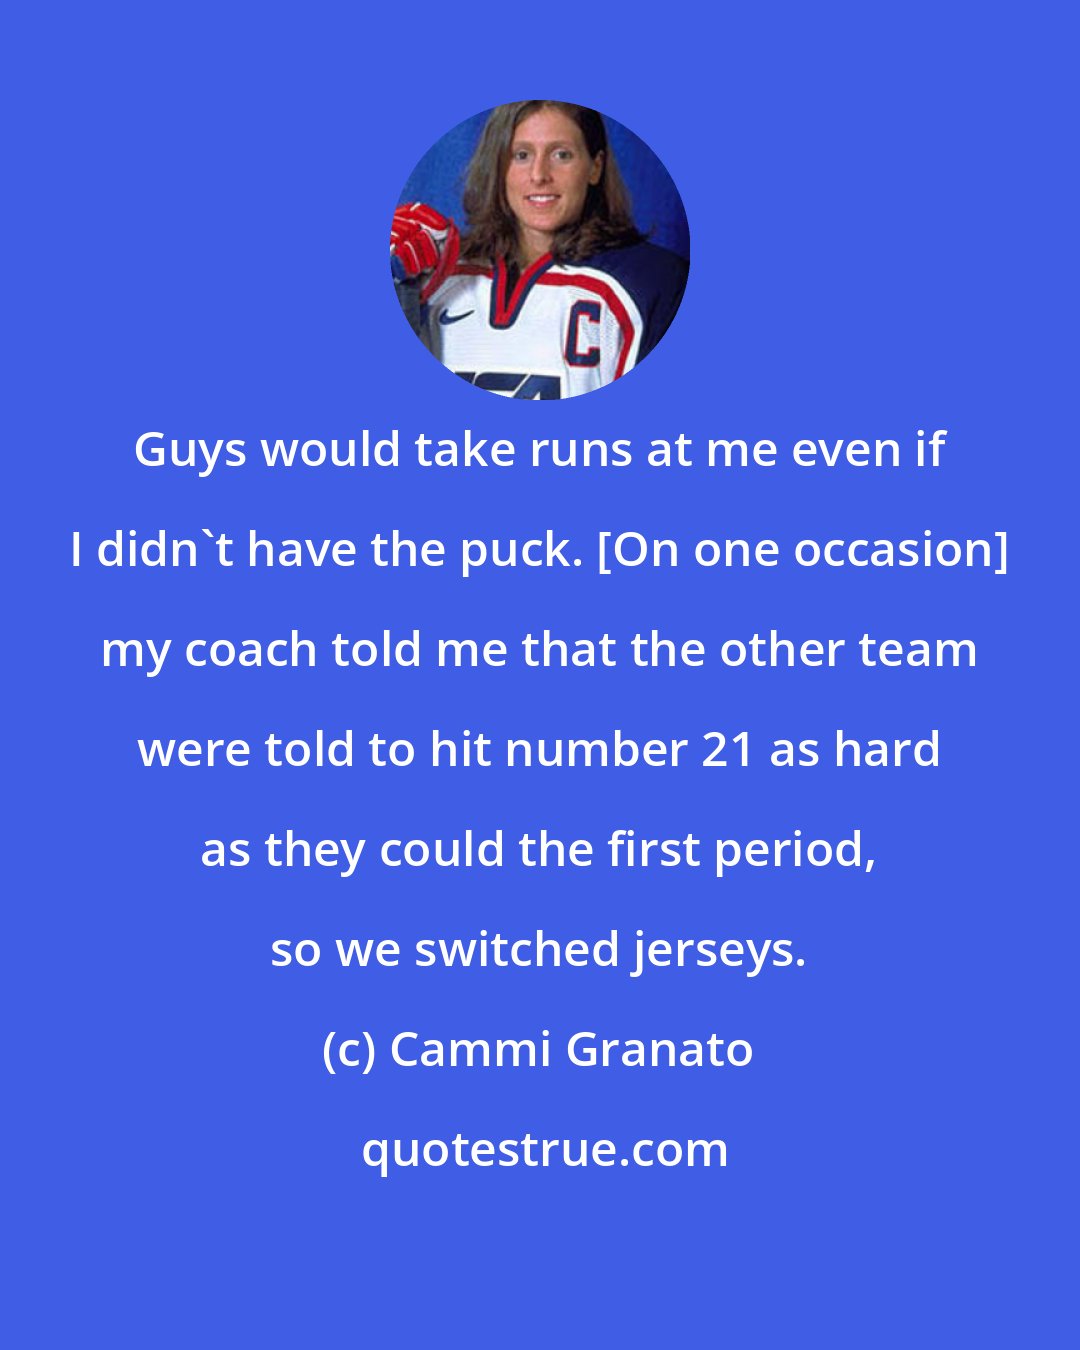 Cammi Granato: Guys would take runs at me even if I didn't have the puck. [On one occasion] my coach told me that the other team were told to hit number 21 as hard as they could the first period, so we switched jerseys.